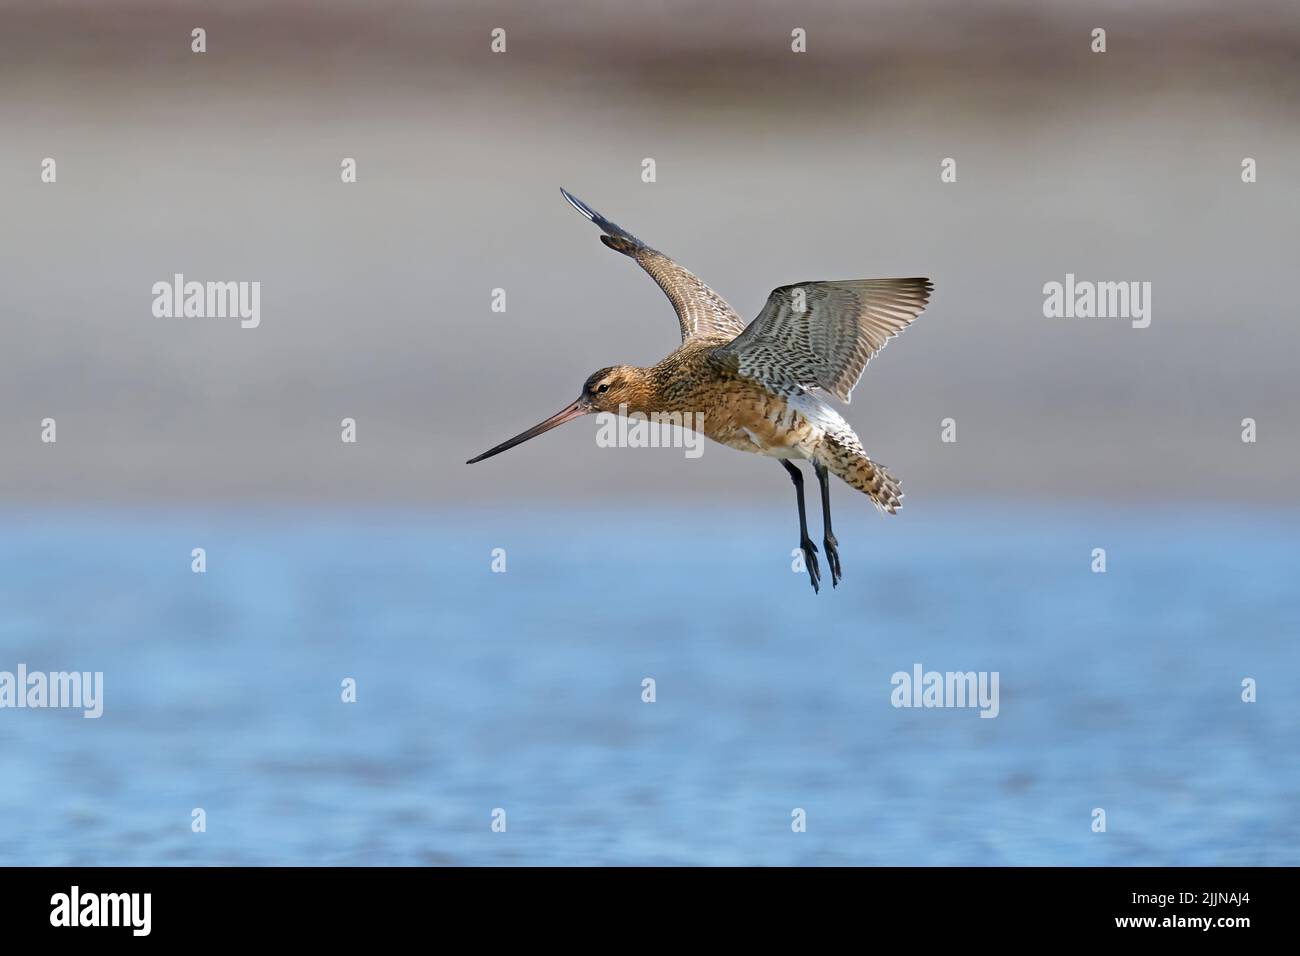 Bar-tailed godwit in flight in its natural enviroment in Denmark Stock Photo